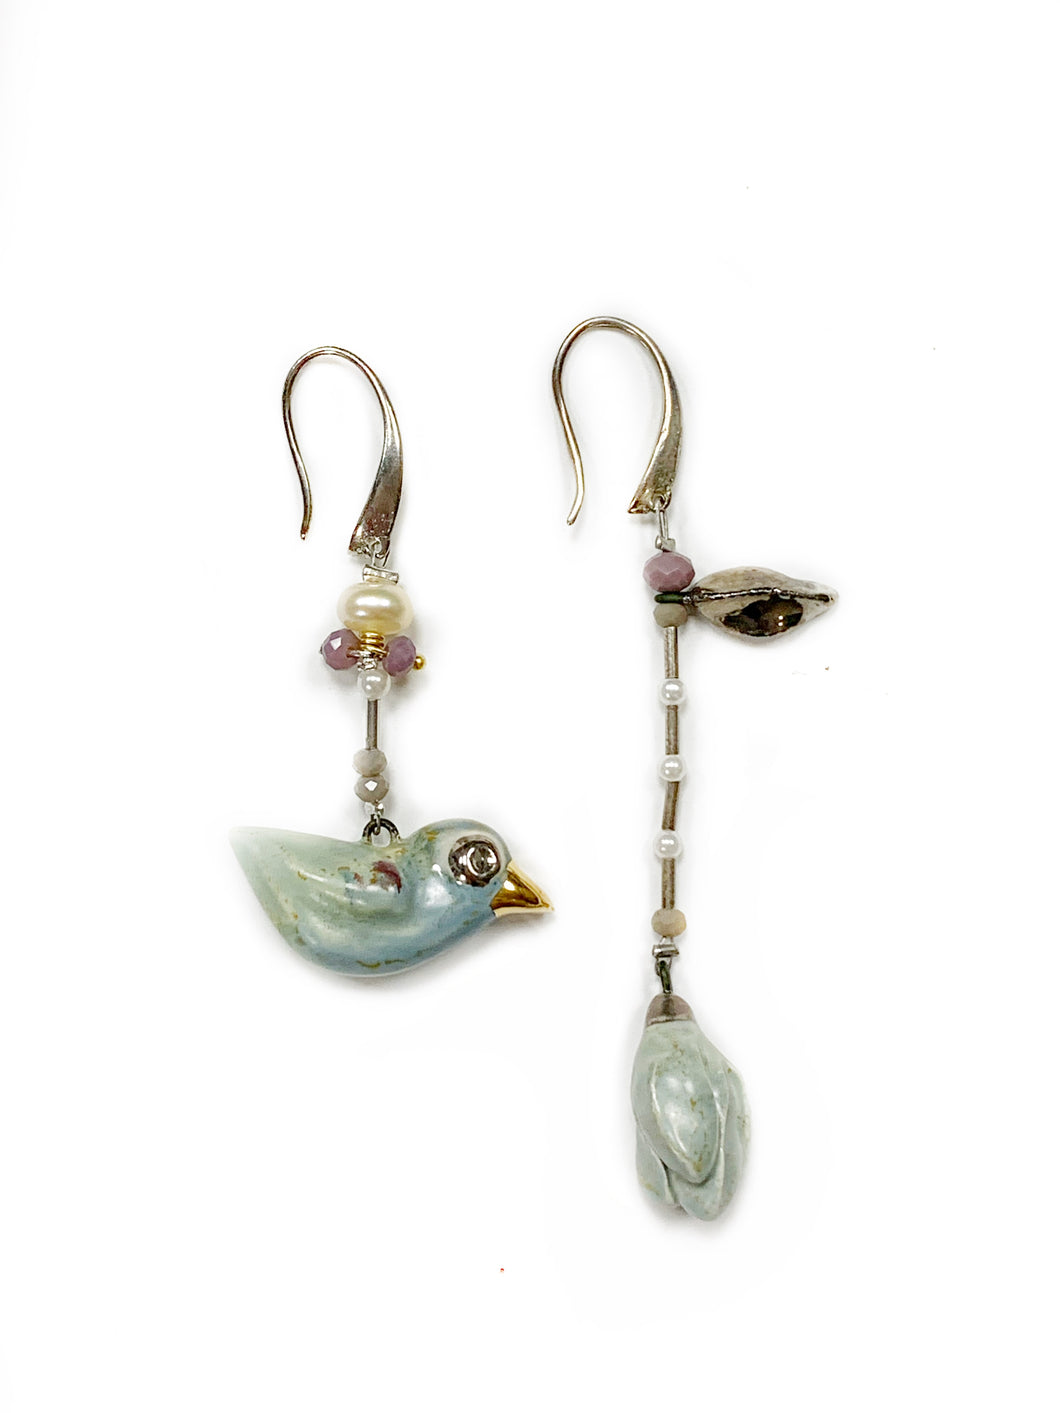 Ceramic mismatched earrings 